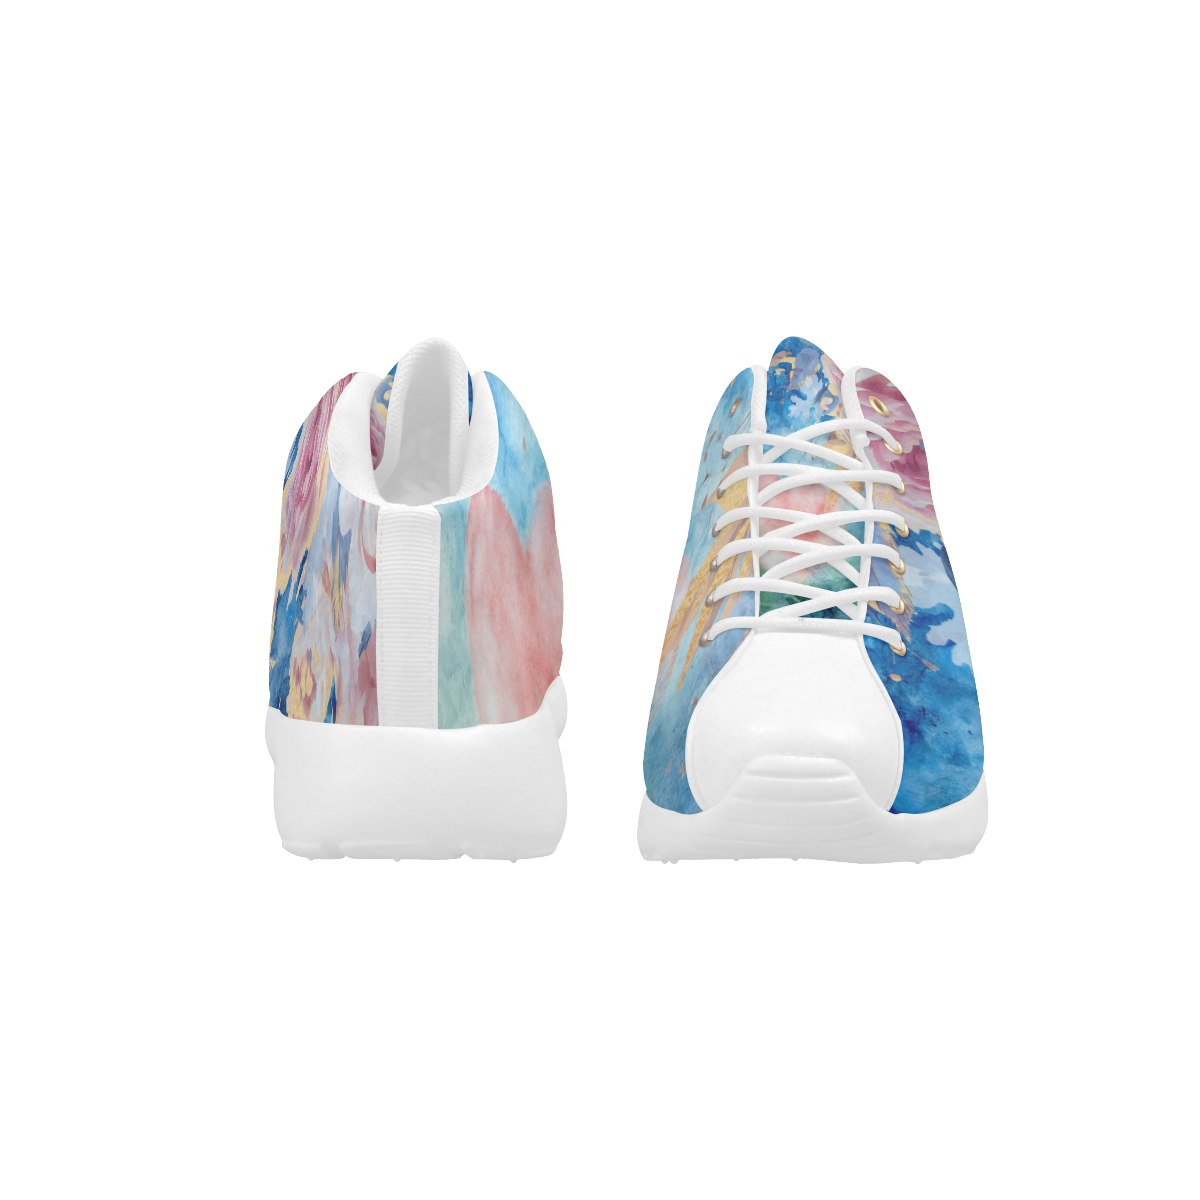 Heart and flowers - Pink and Blue Men's Basketball Training Shoes (Model 47502)